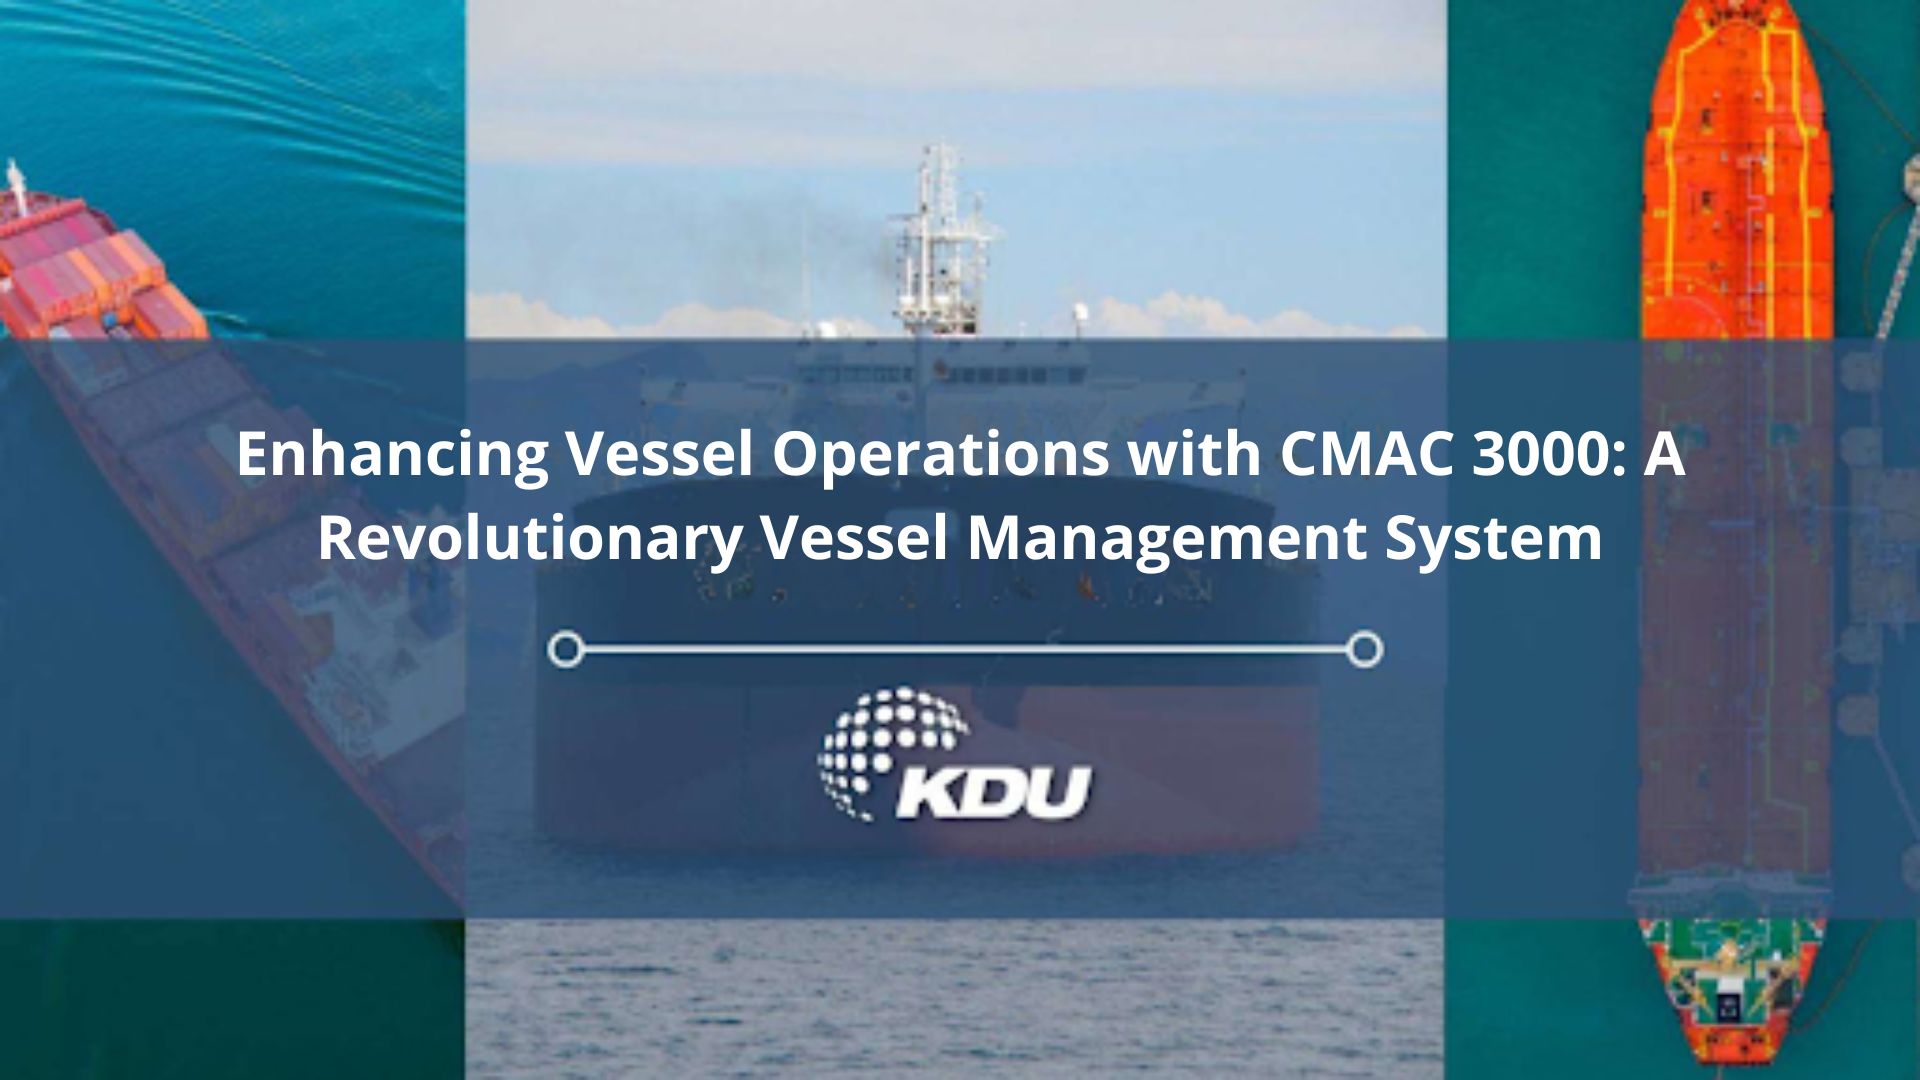 Enhancing Vessel Operations with CMAC 3000: A Revolutionary Vessel Management System